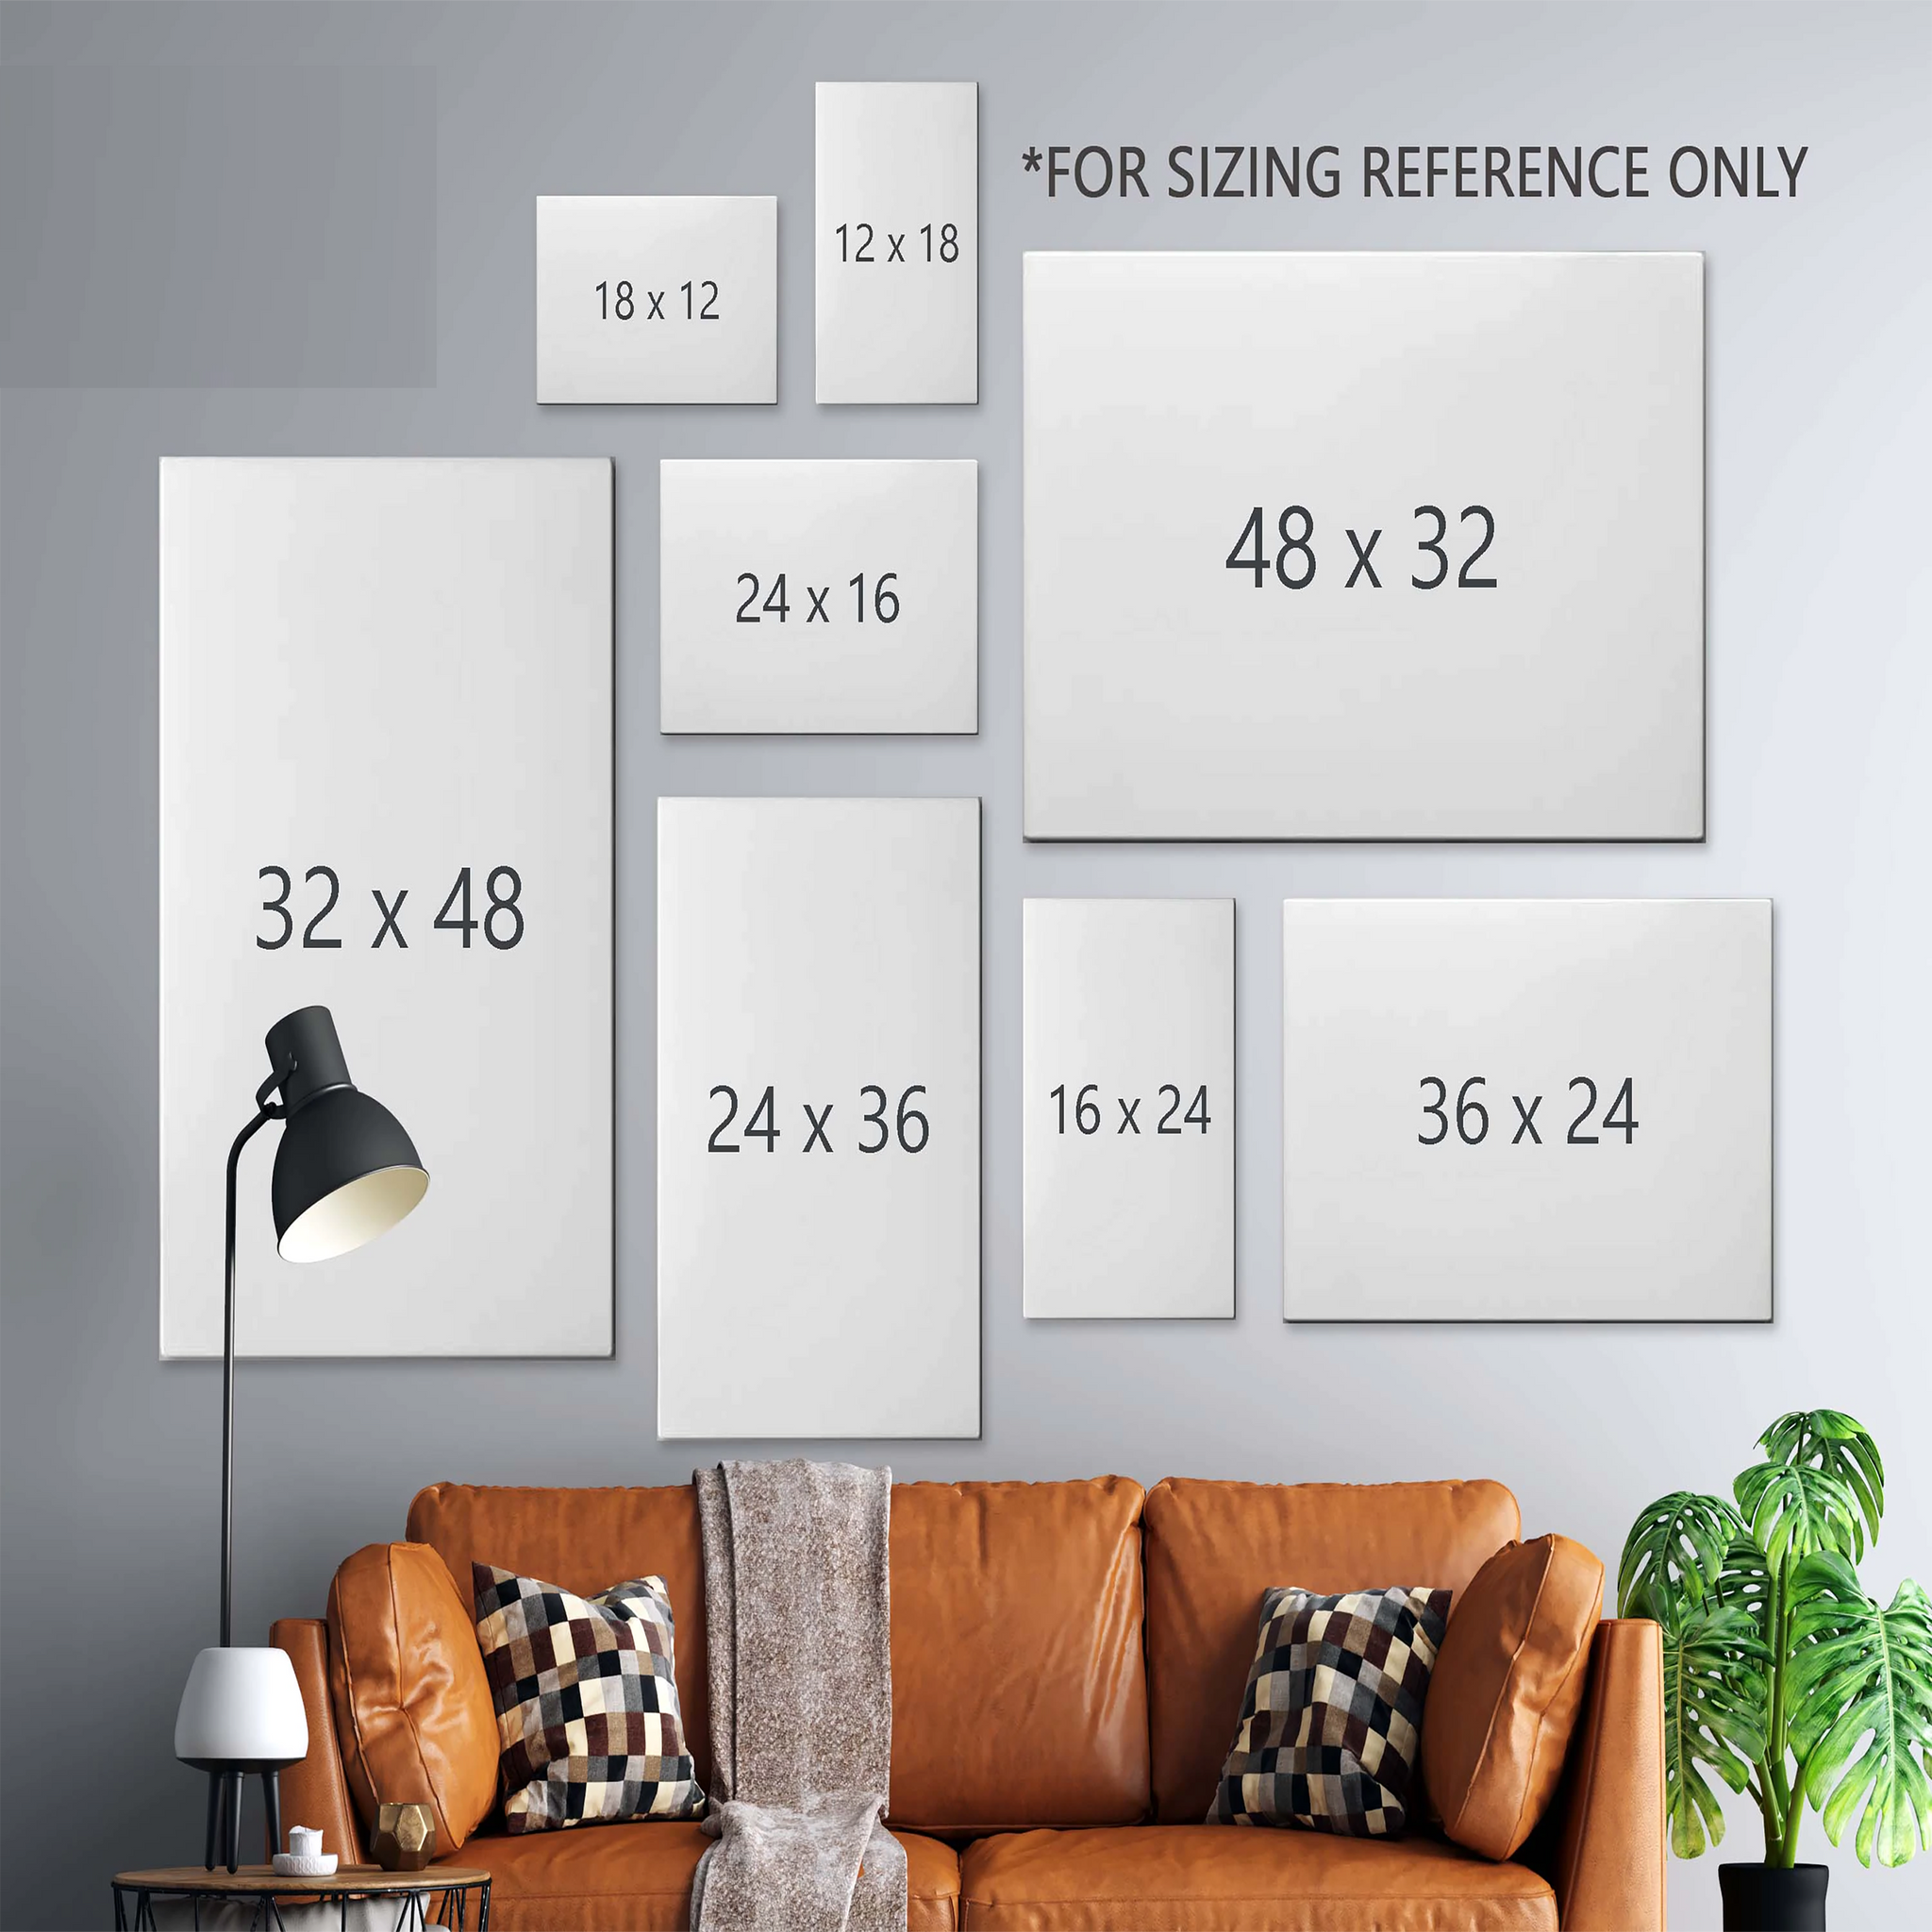 Skitongifts Poster No Framed Reading That Place Where You're By Yourself. But You Are Never Alone... Wall Art Decor 748449